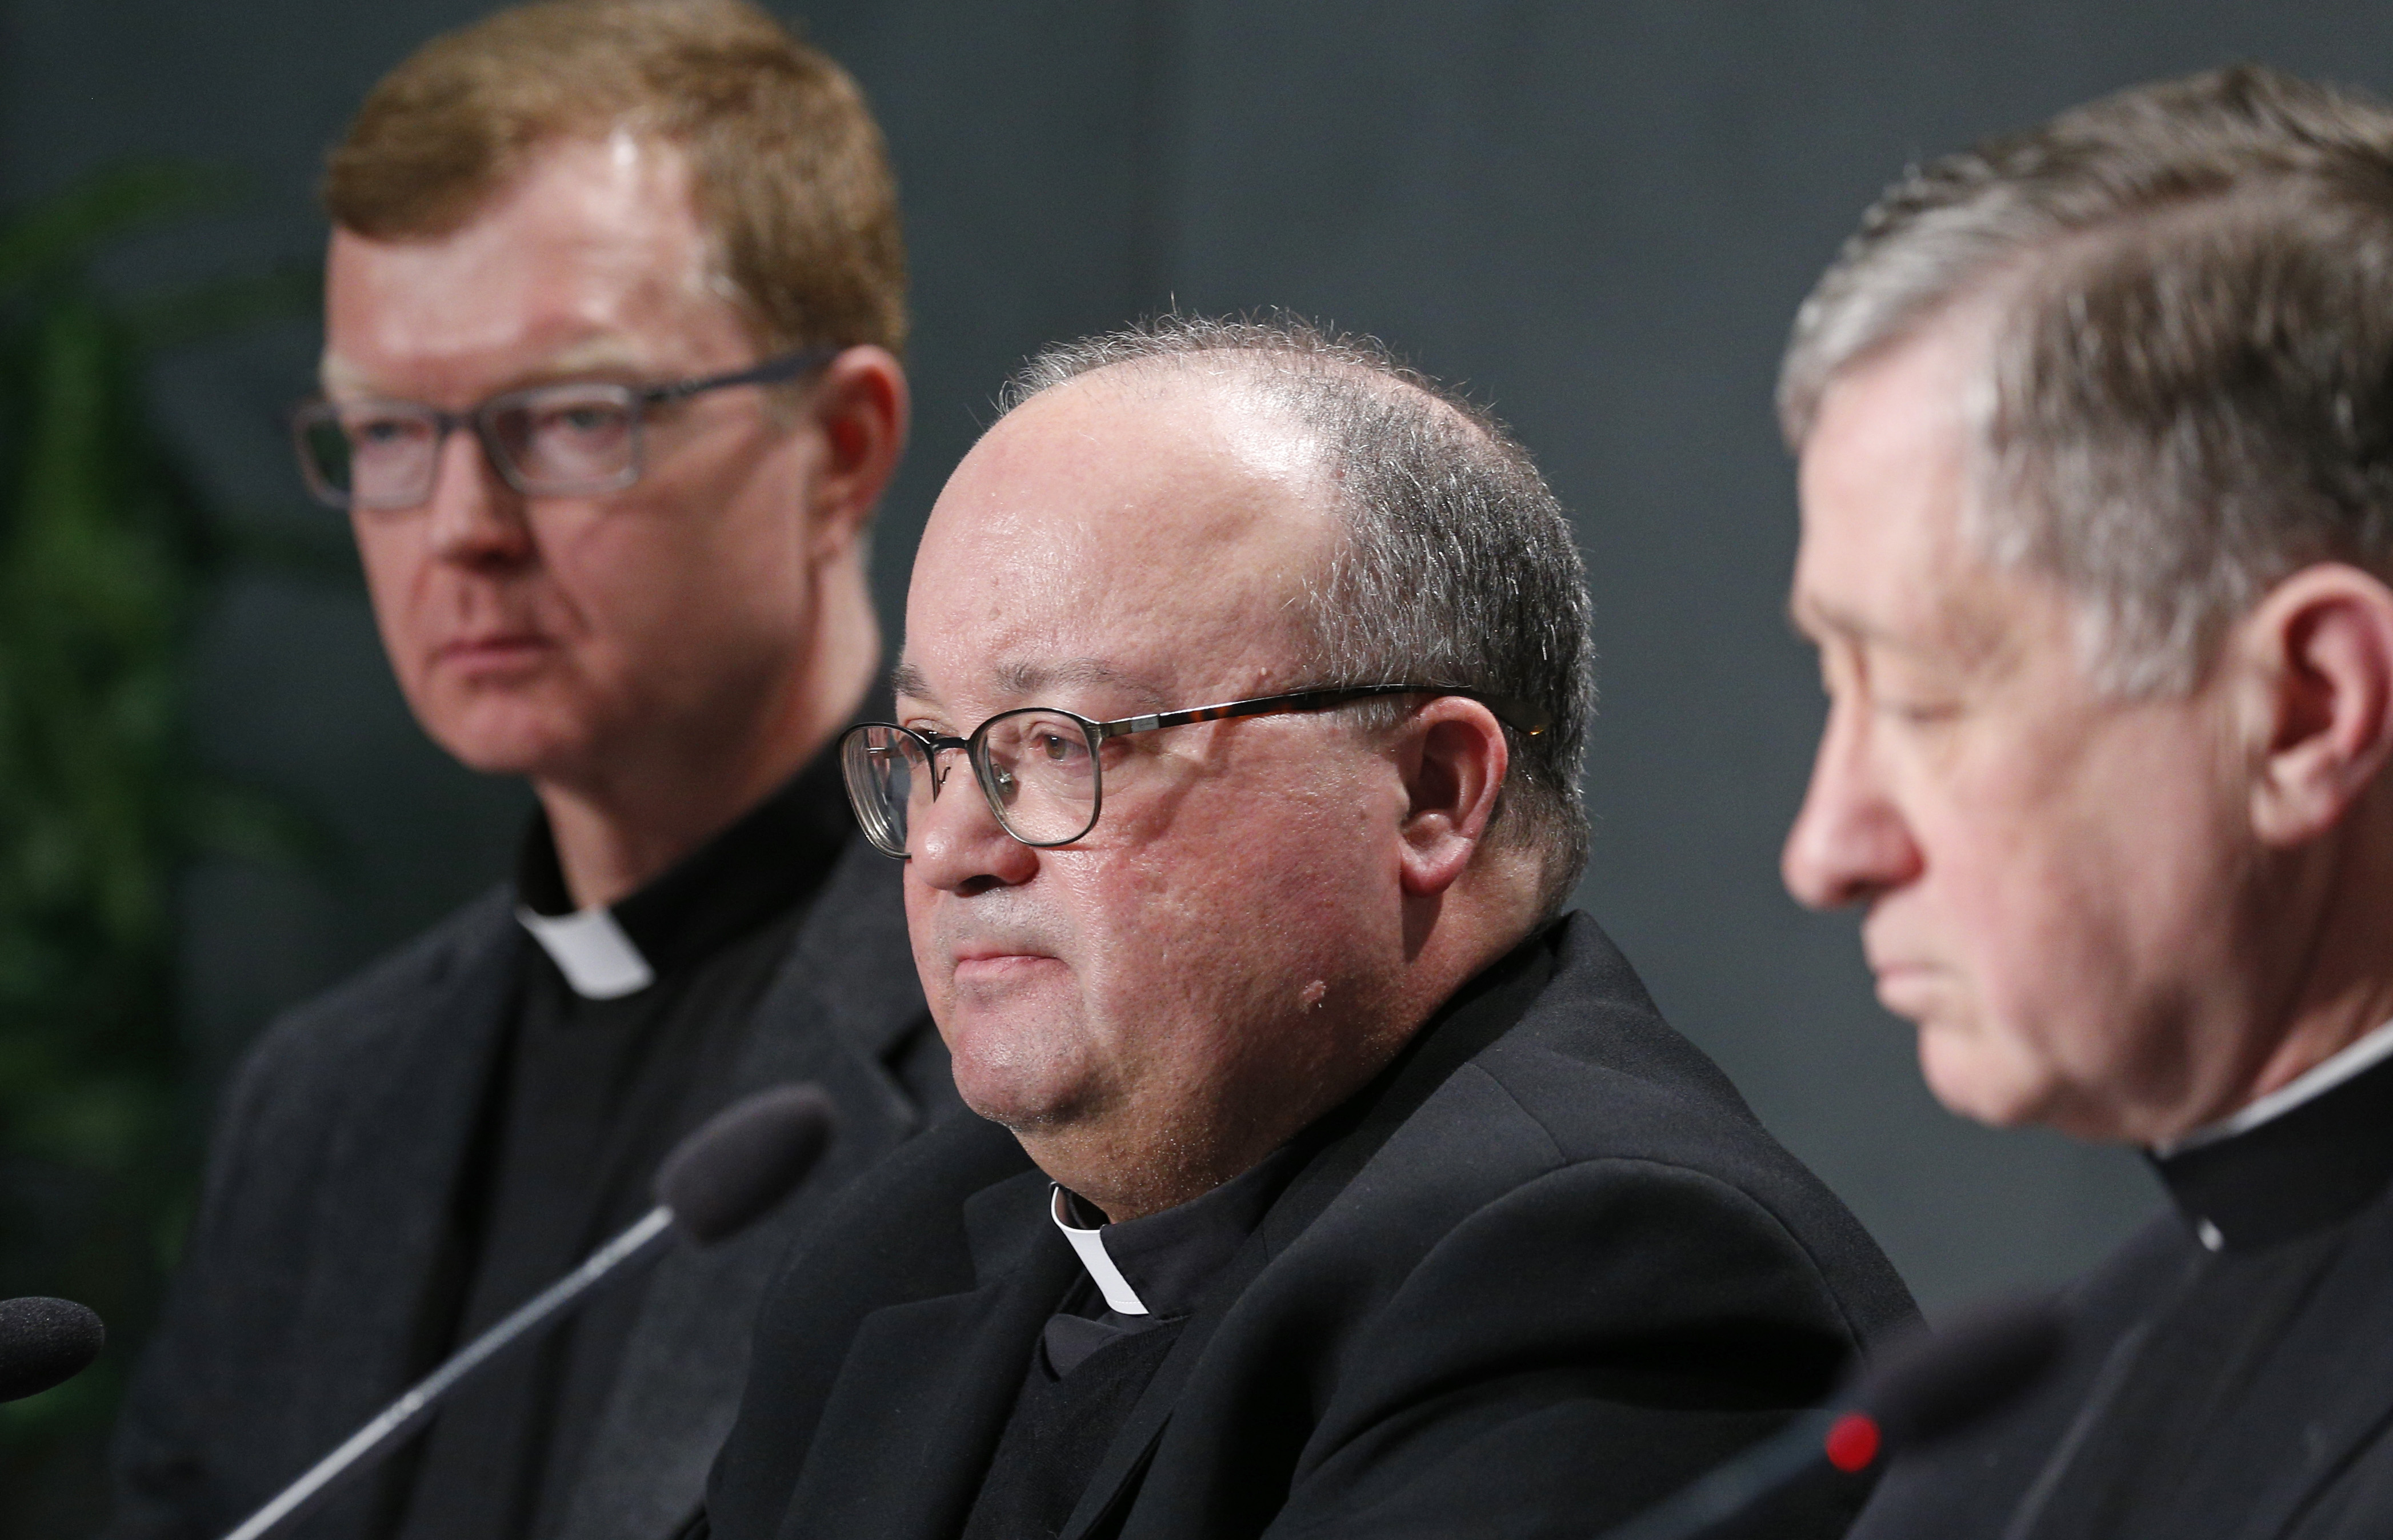 Vatican abuse summit: Silence and denial are unacceptable, says archbishop